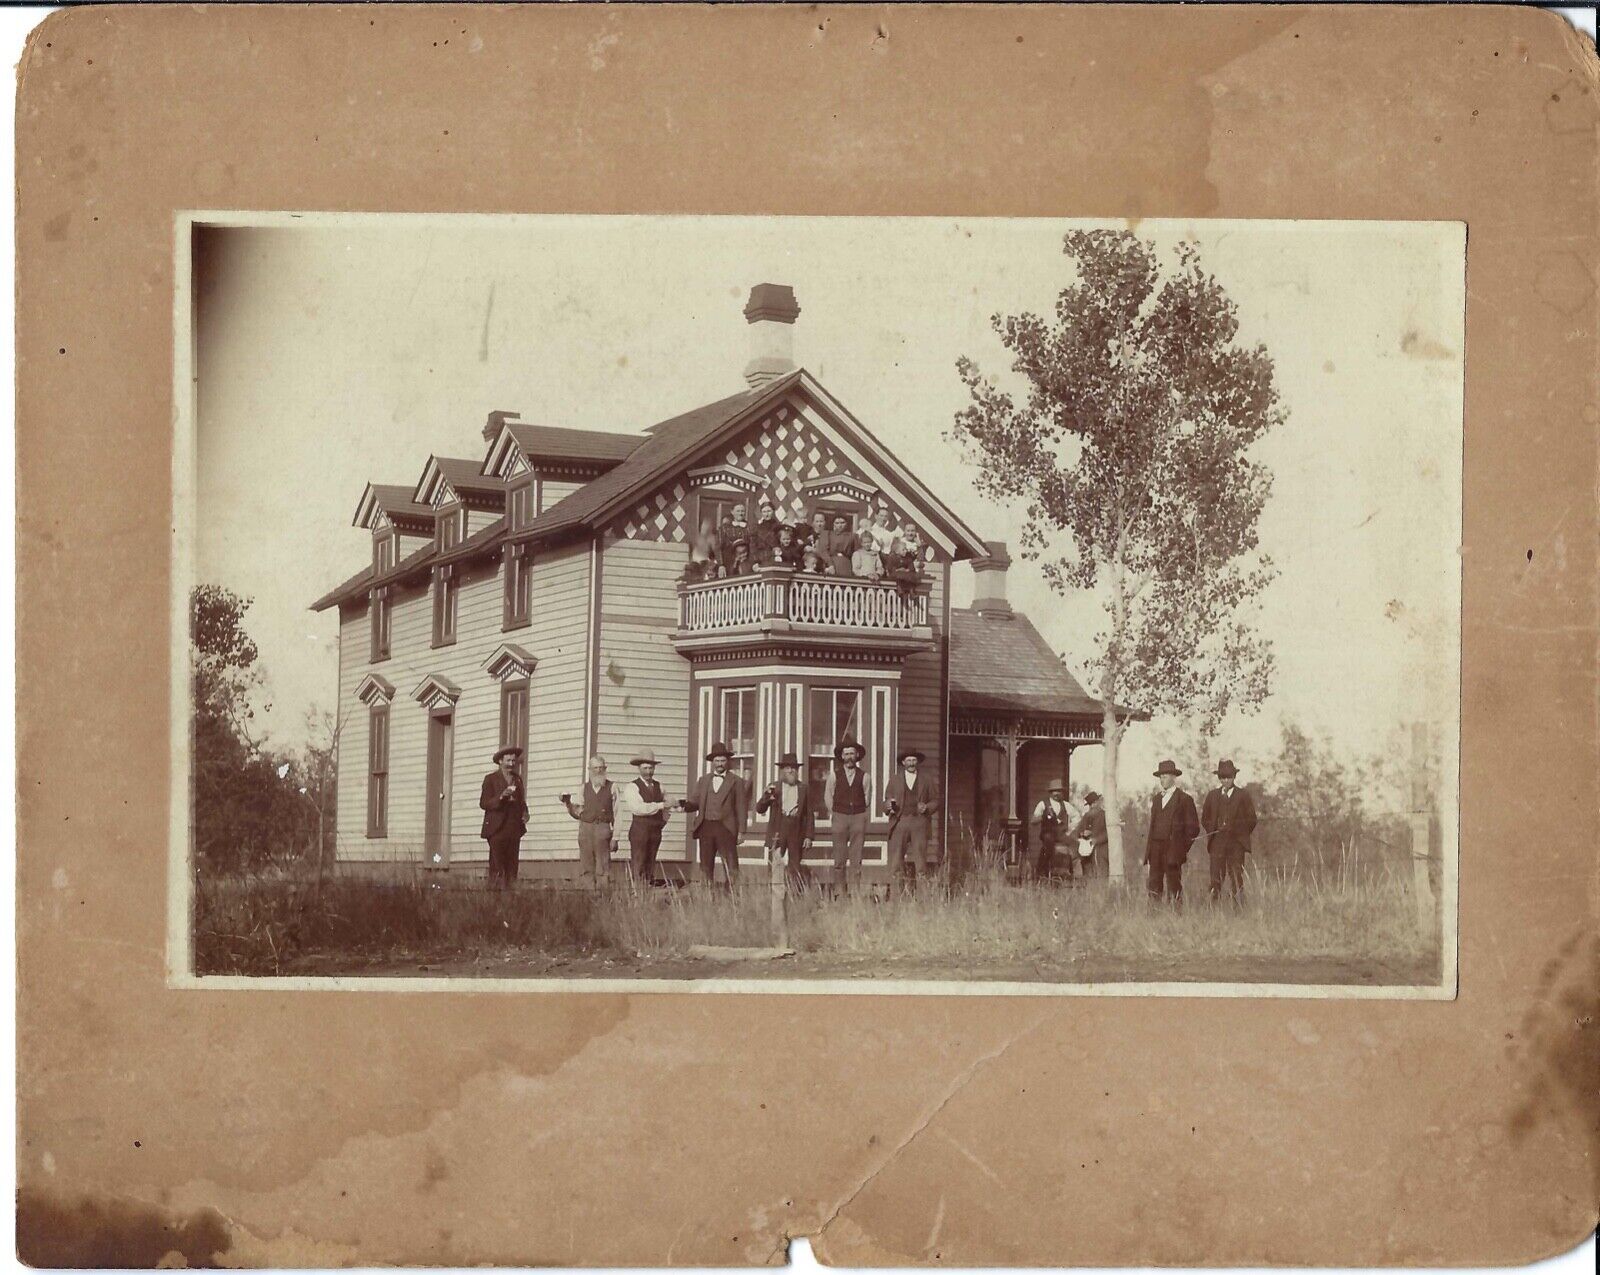 Victorian era house architecture celebration cabinet photograph early 1900s